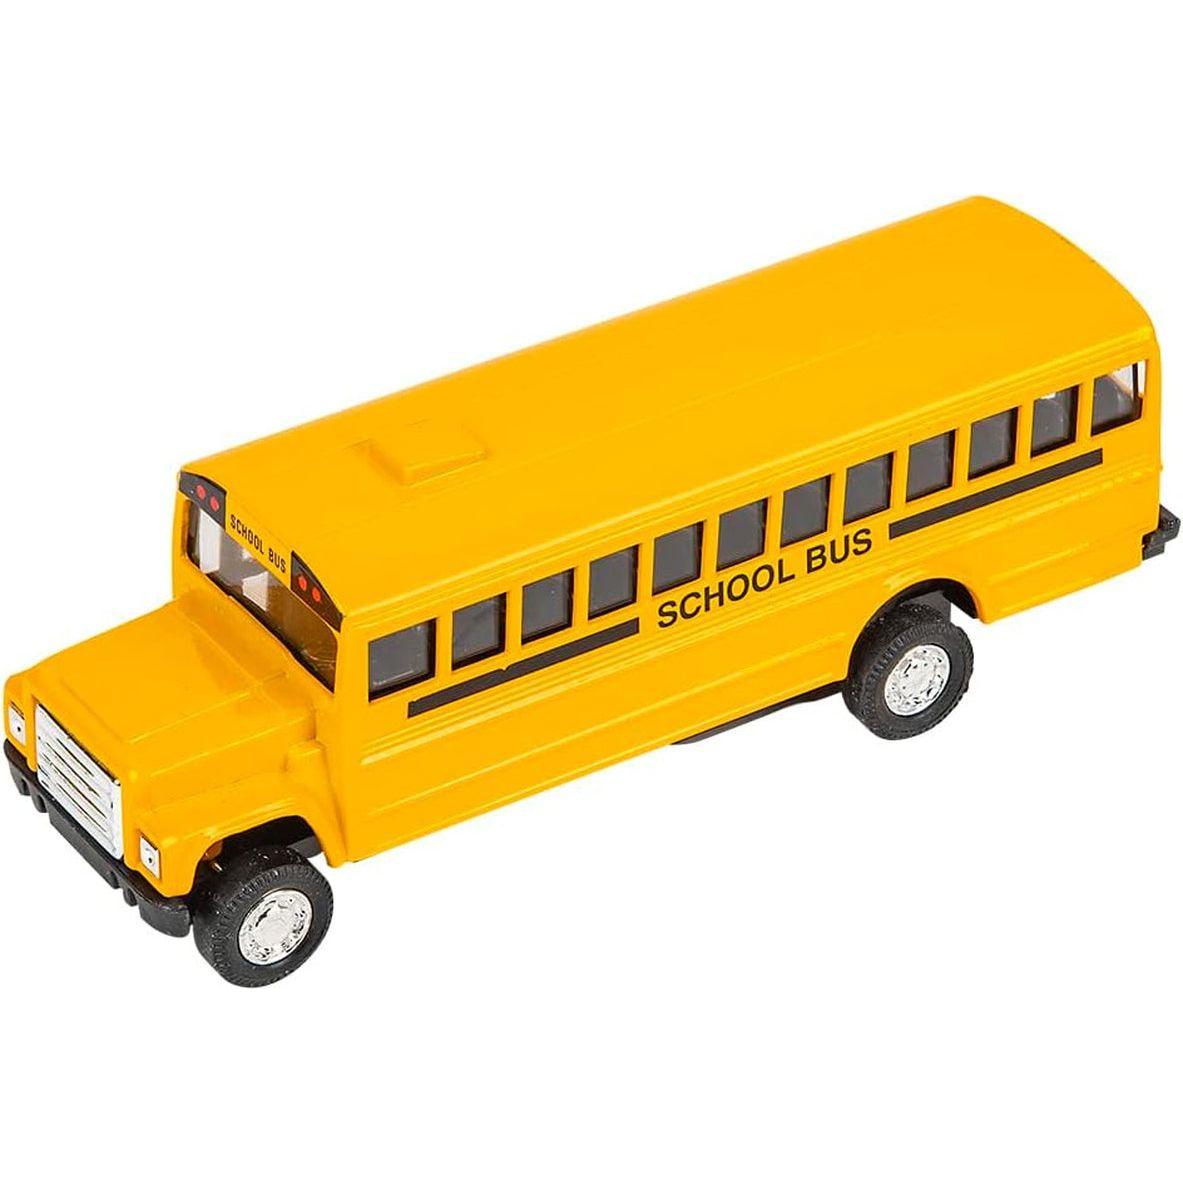 5 Inch Die Cast School Bus with Pull-Back Action, 1 per Order